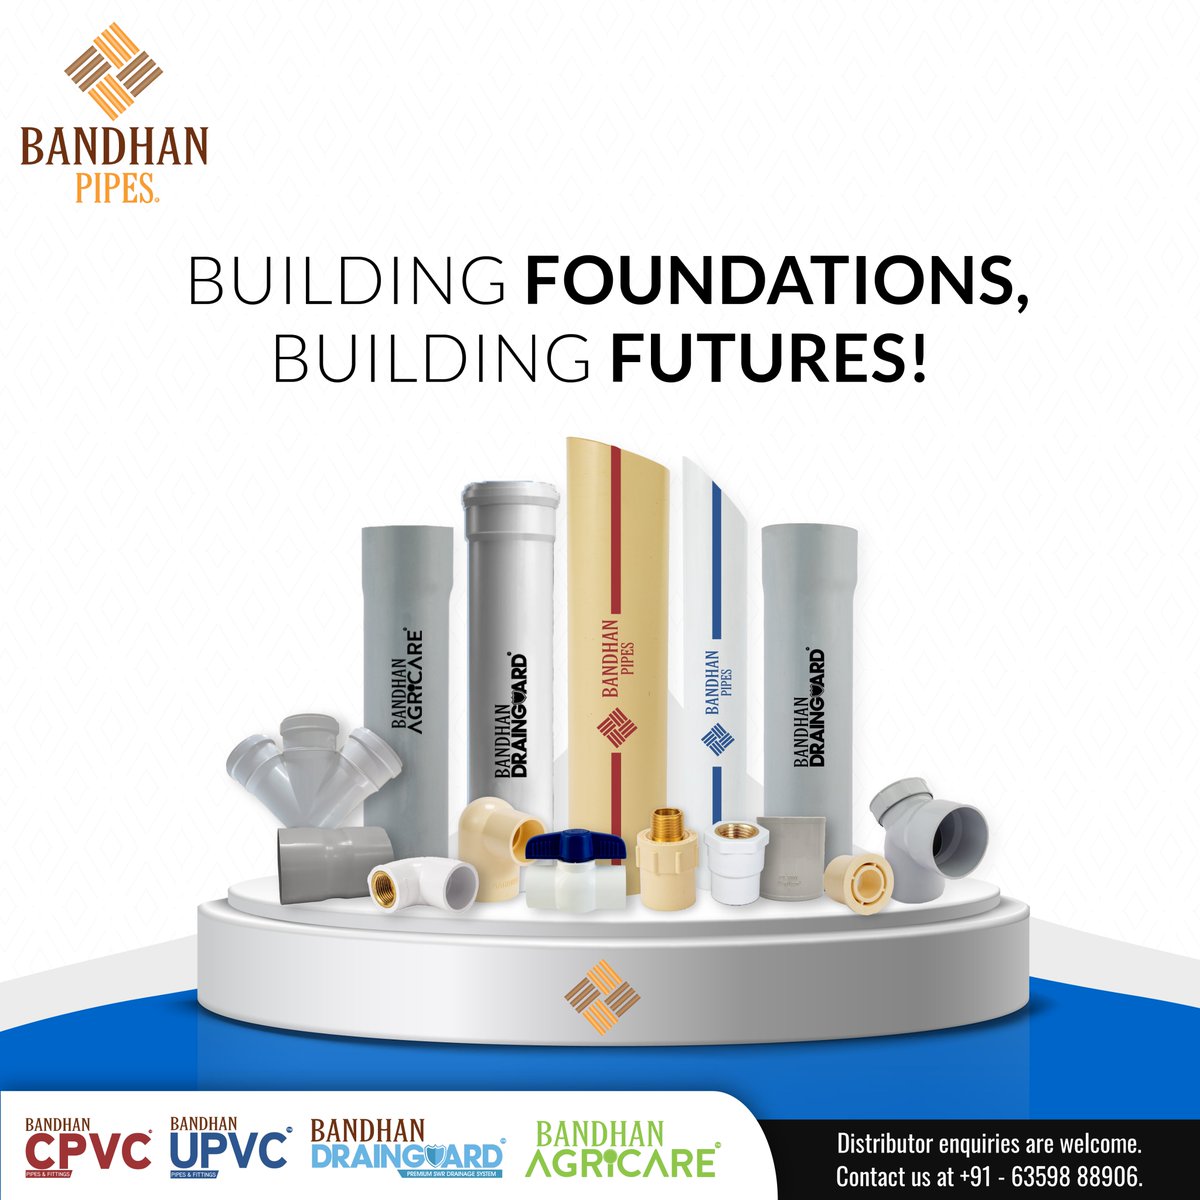 Building the foundations for a brighter tomorrow, one PVC pipe at a time. . . #PVCinnovation #BuildingTomorrow #bandhanpipes #drainguard #SochoBandhanPipes #pipes #plumbing #pvc #pvcpipes #industry #cpvc #upvc #swr #waterpipes #water #watersupply #products #manufacturing